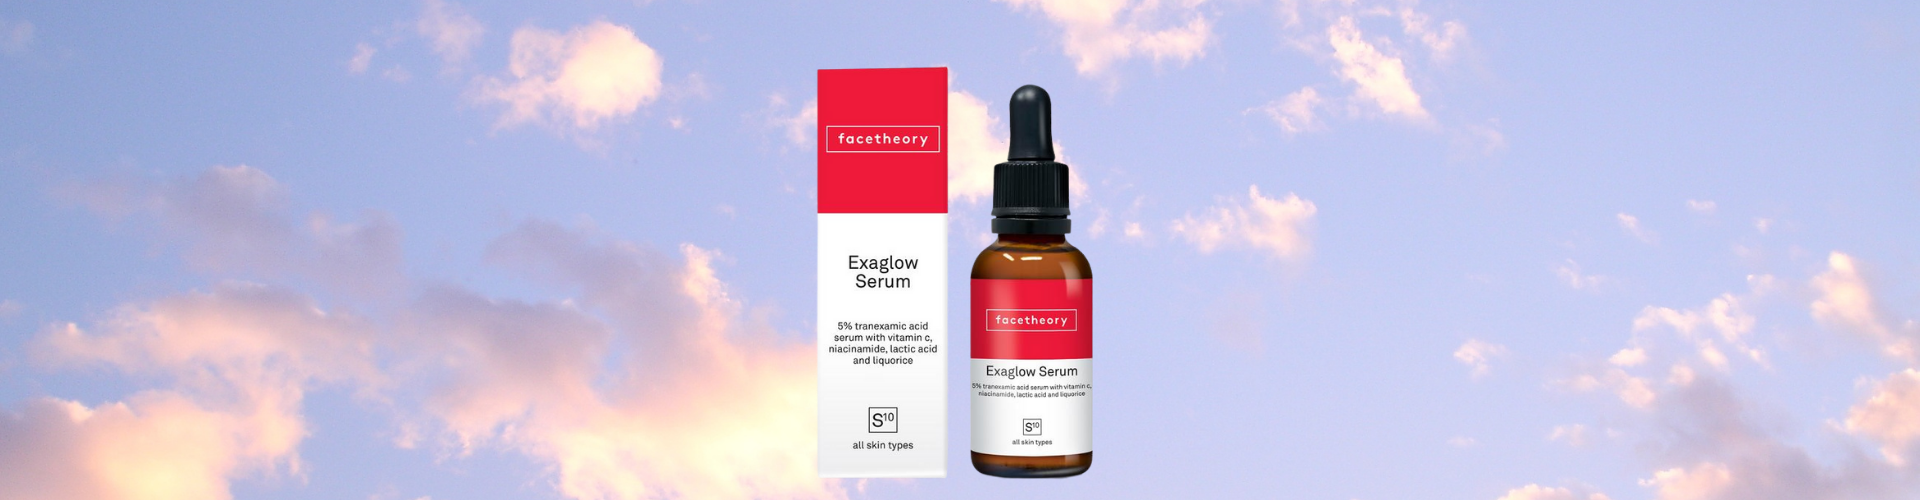 Facetheory exaglow serum review S10